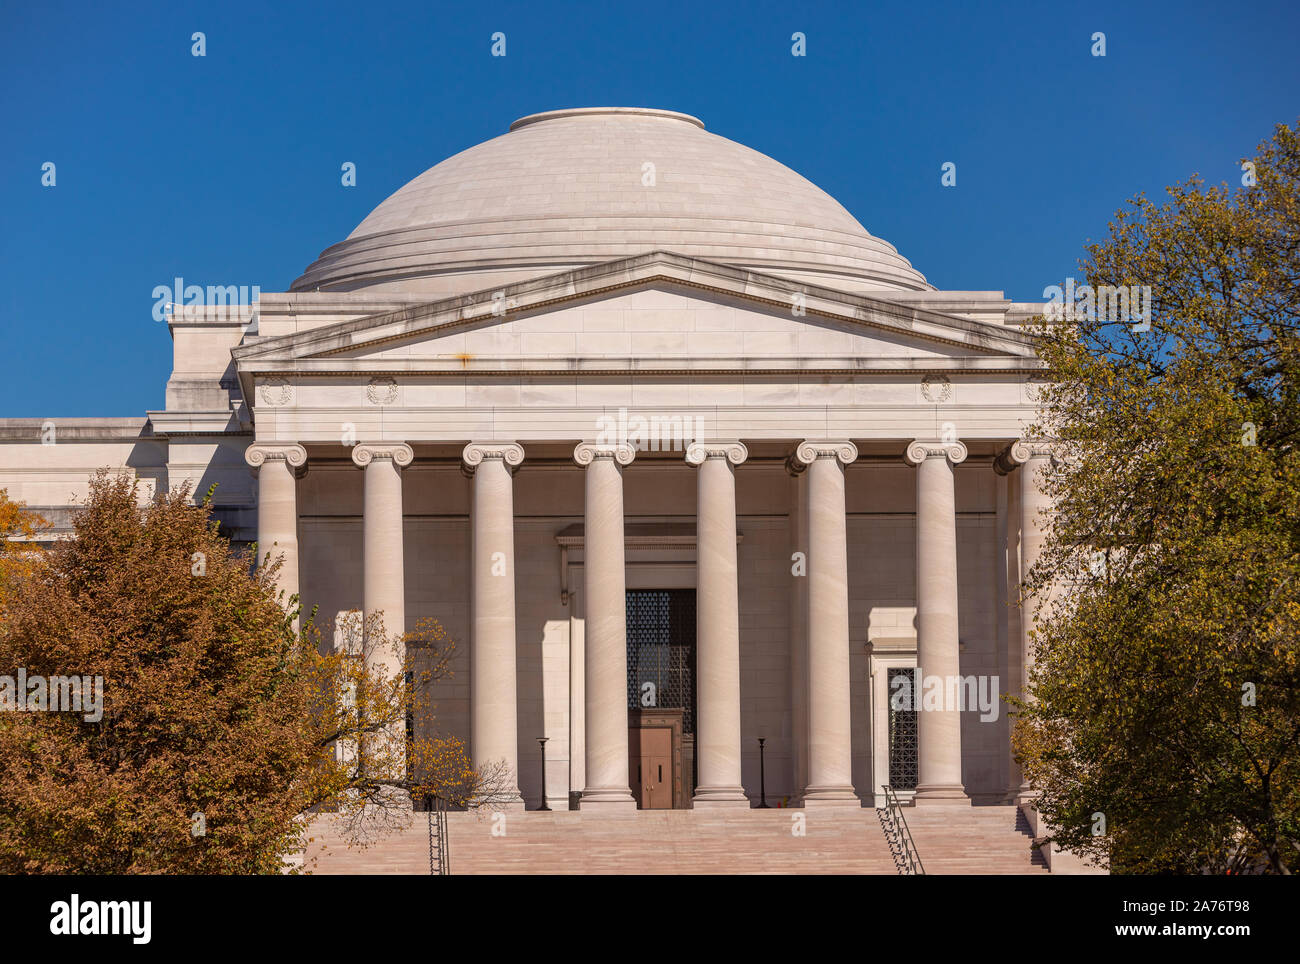 WASHINGTON, DC, USA - The National Gallery of Art, a Smithsonian Museum on the National Mall. Stock Photo